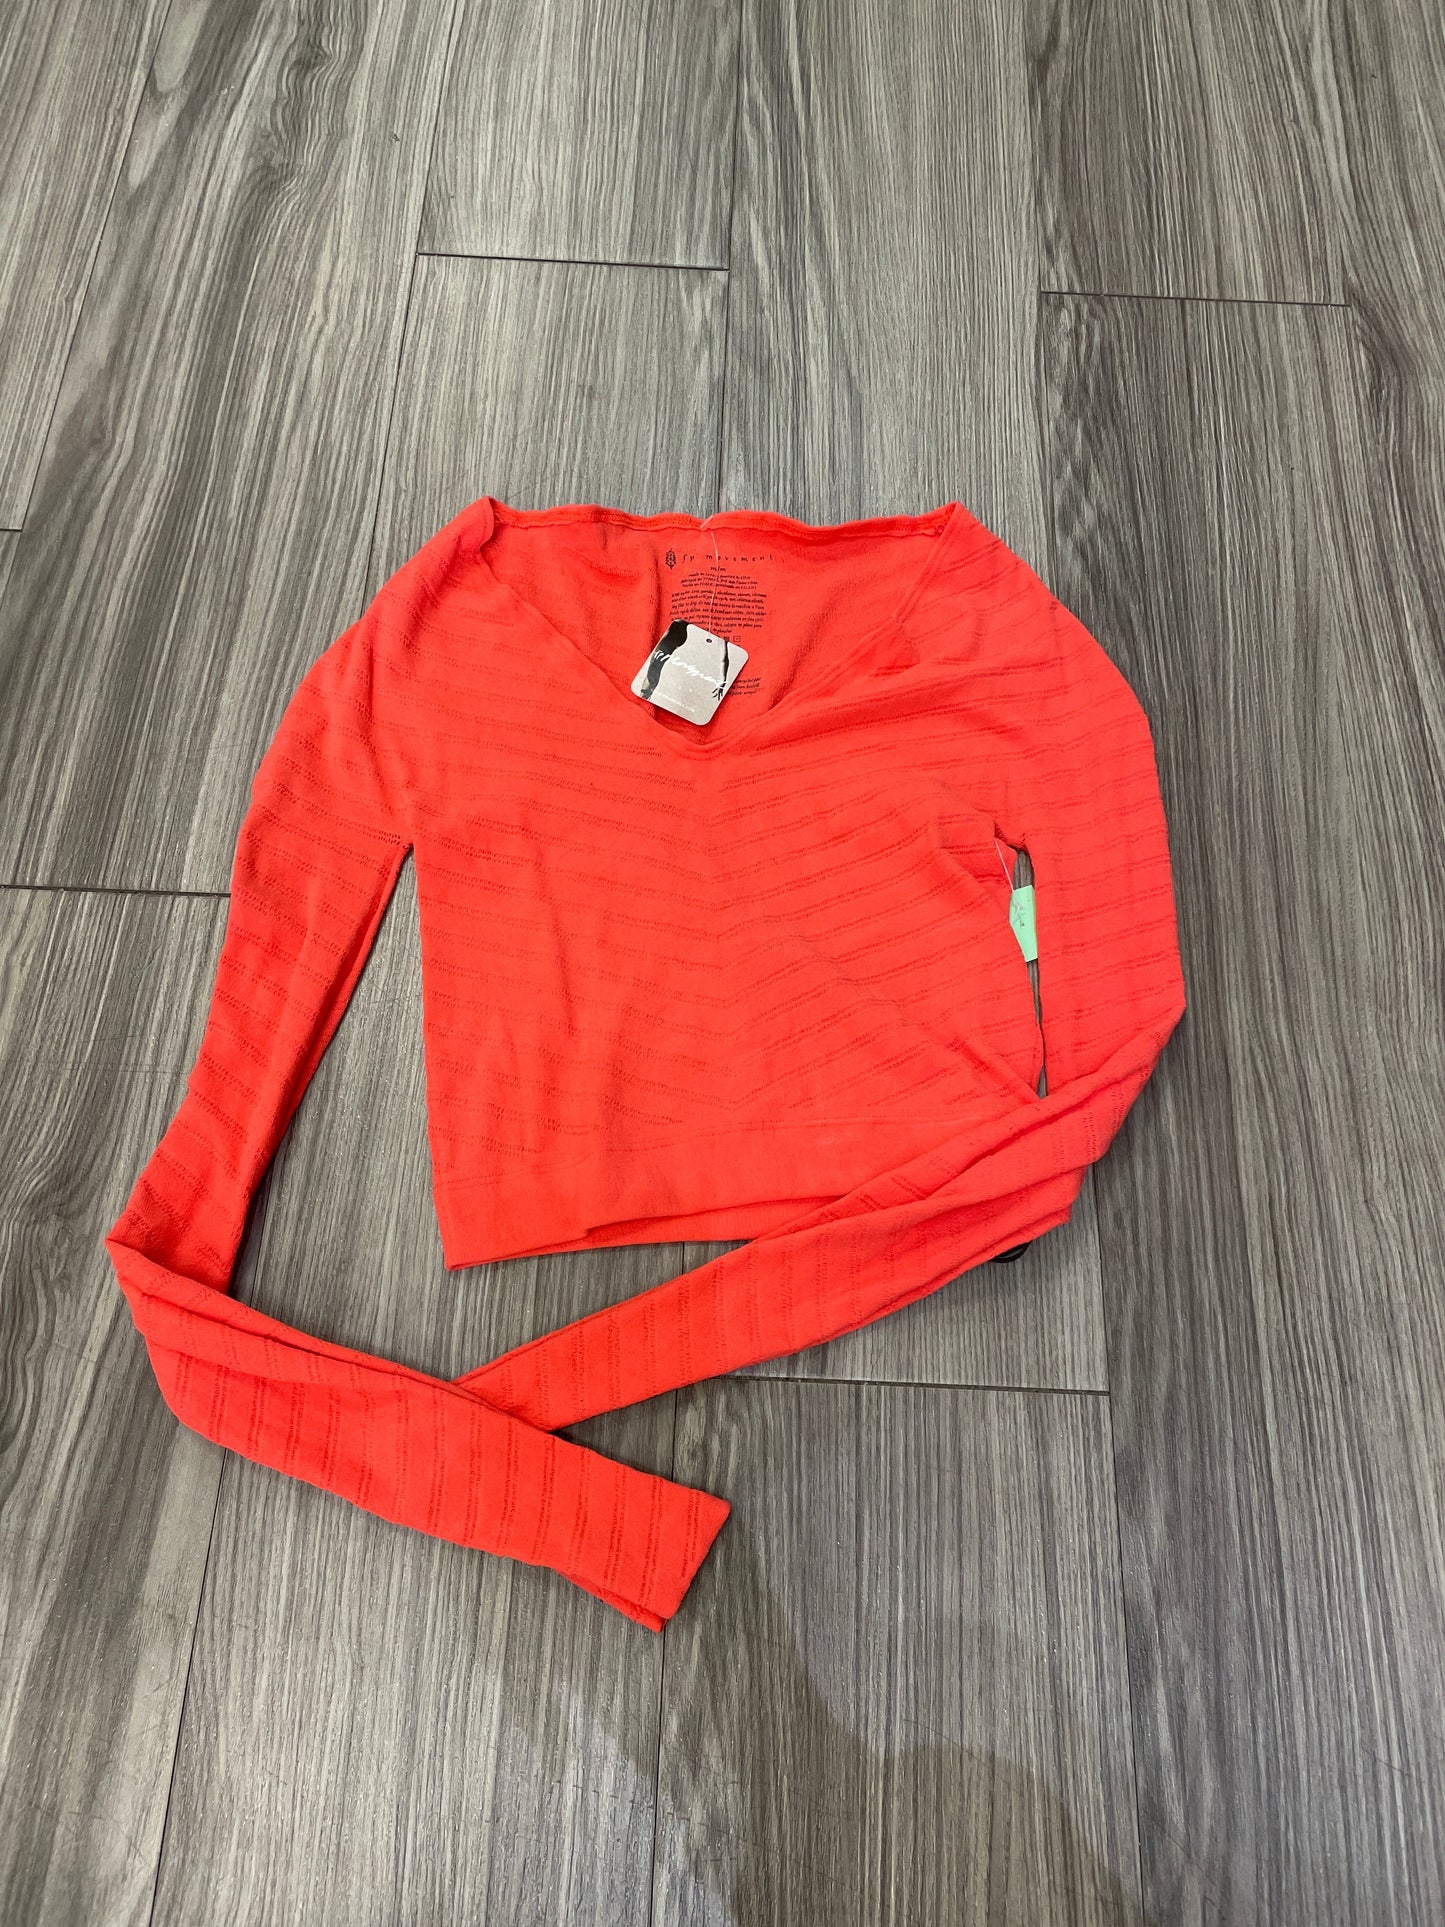 Coral Top Long Sleeve Free People, Size M